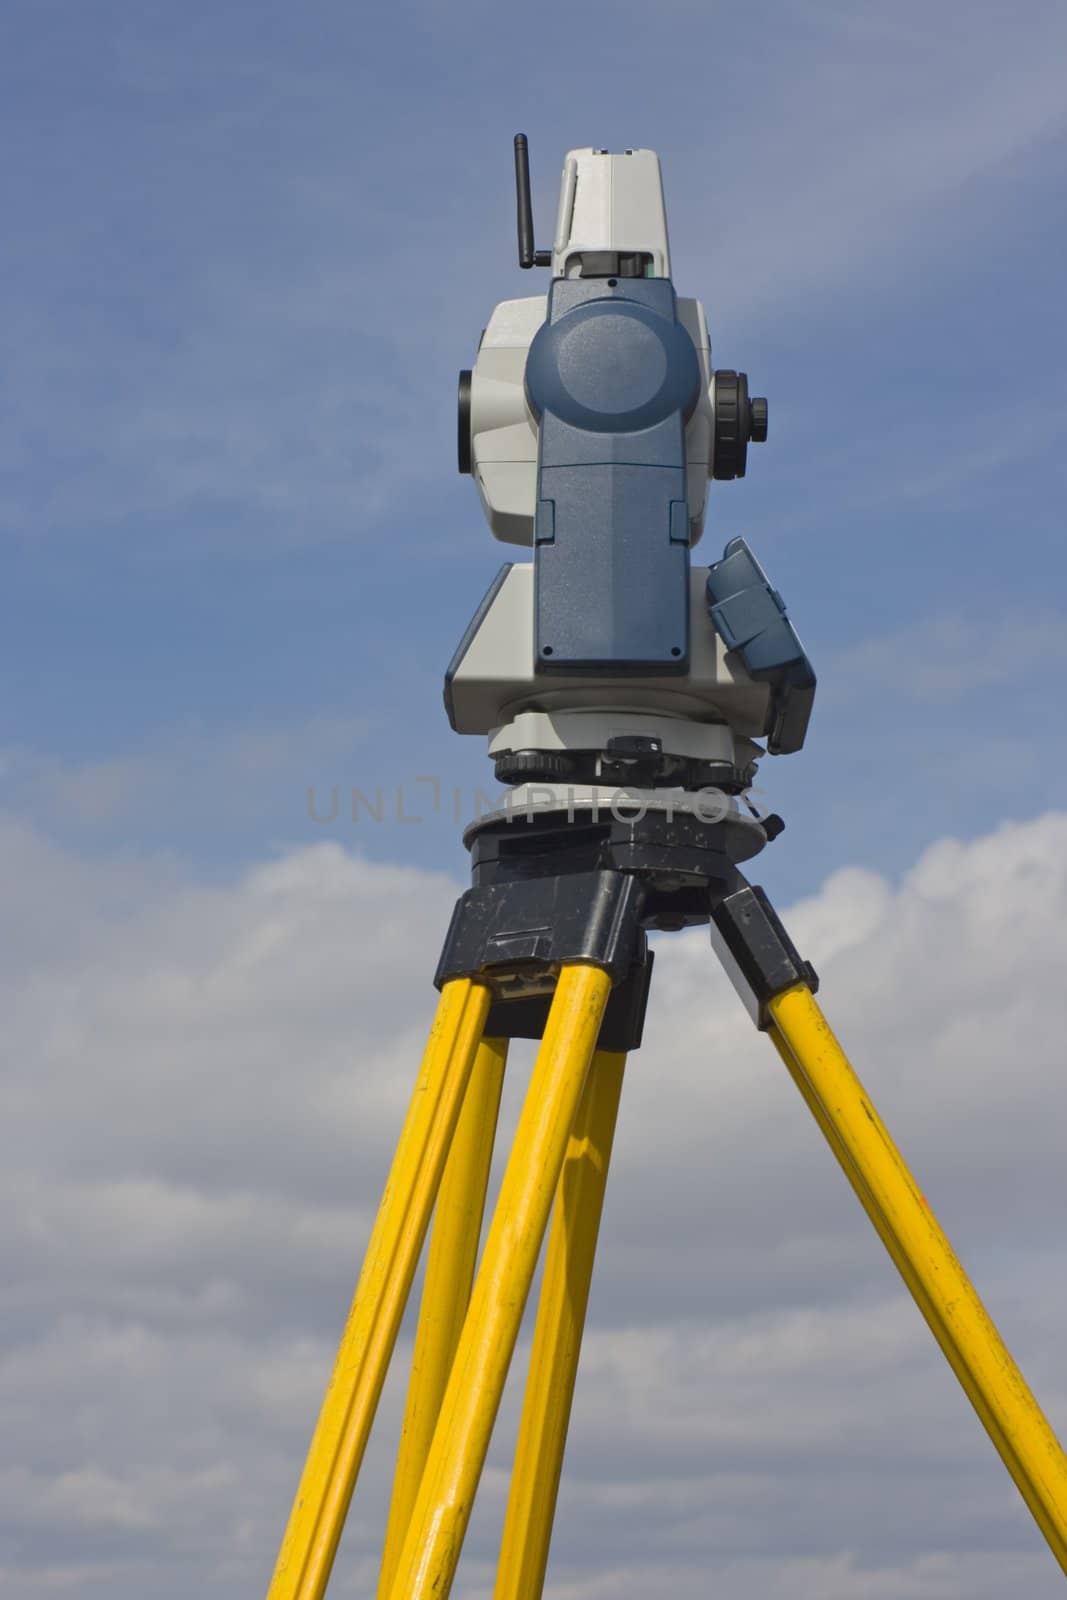 Side of theodolite against cloudy sky.